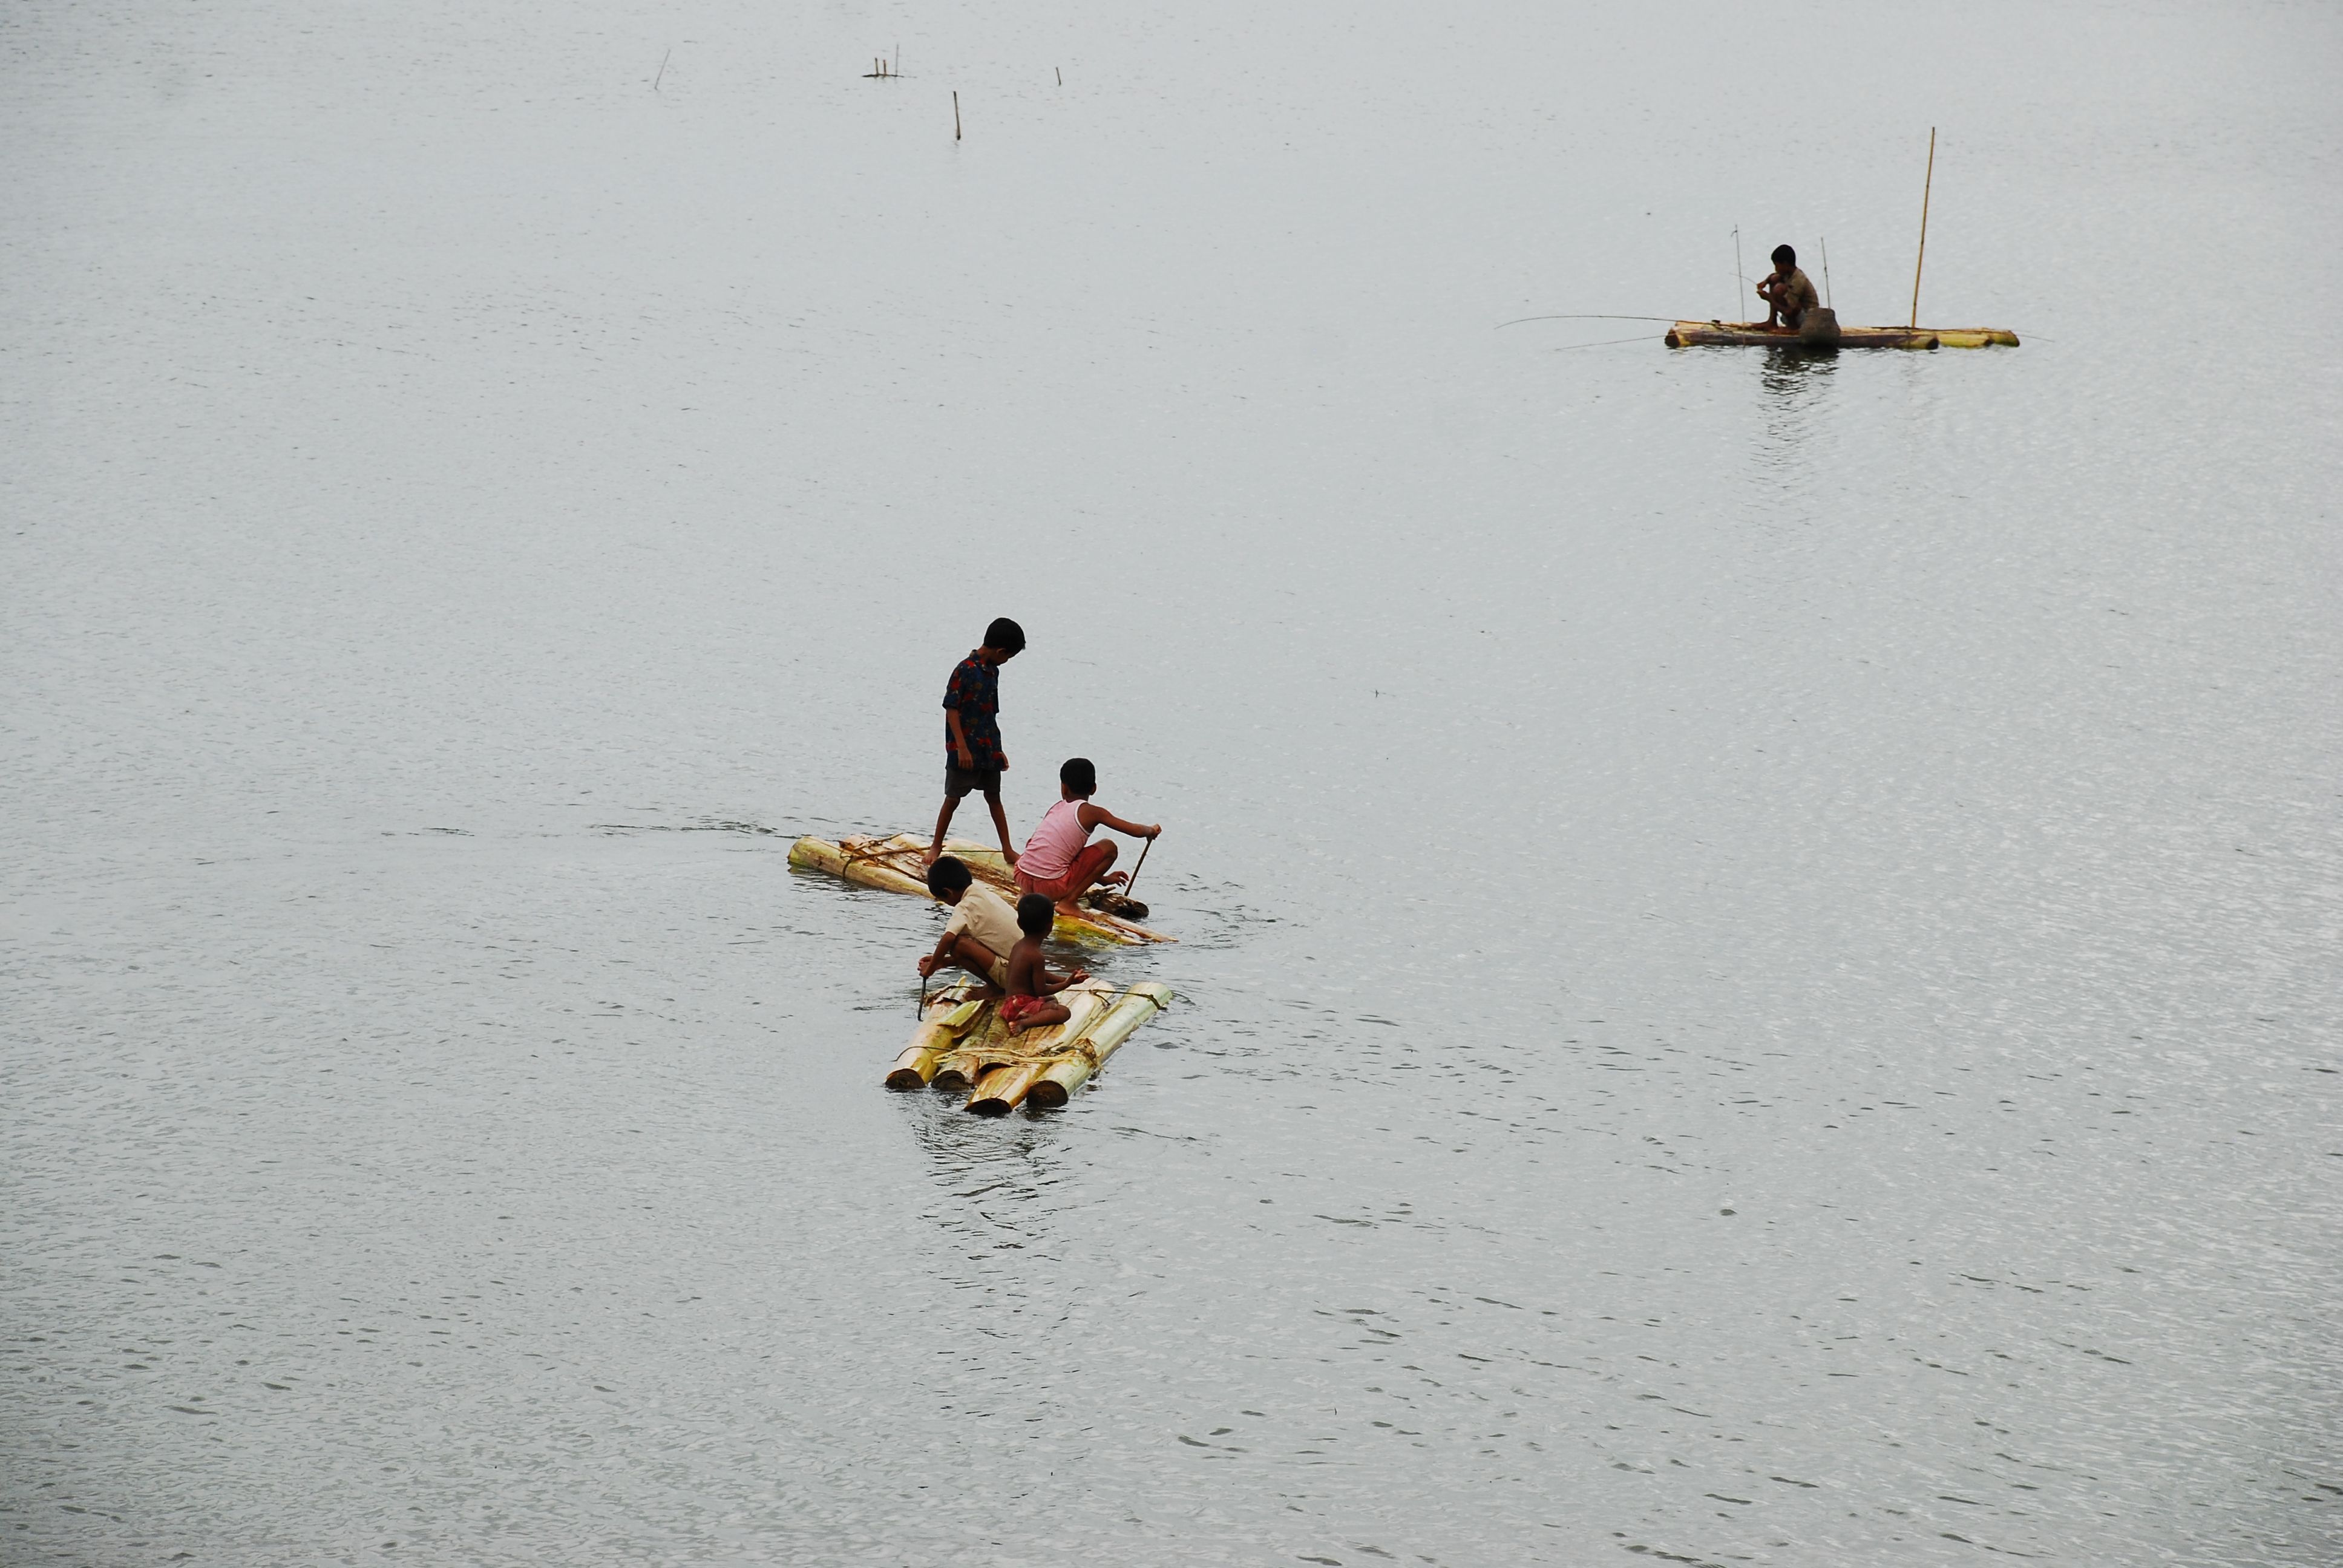 Children play with old rafts over flooded fields in rural Bangladesh. Image by Amir Jina / CC. Bangladesh, 2009.